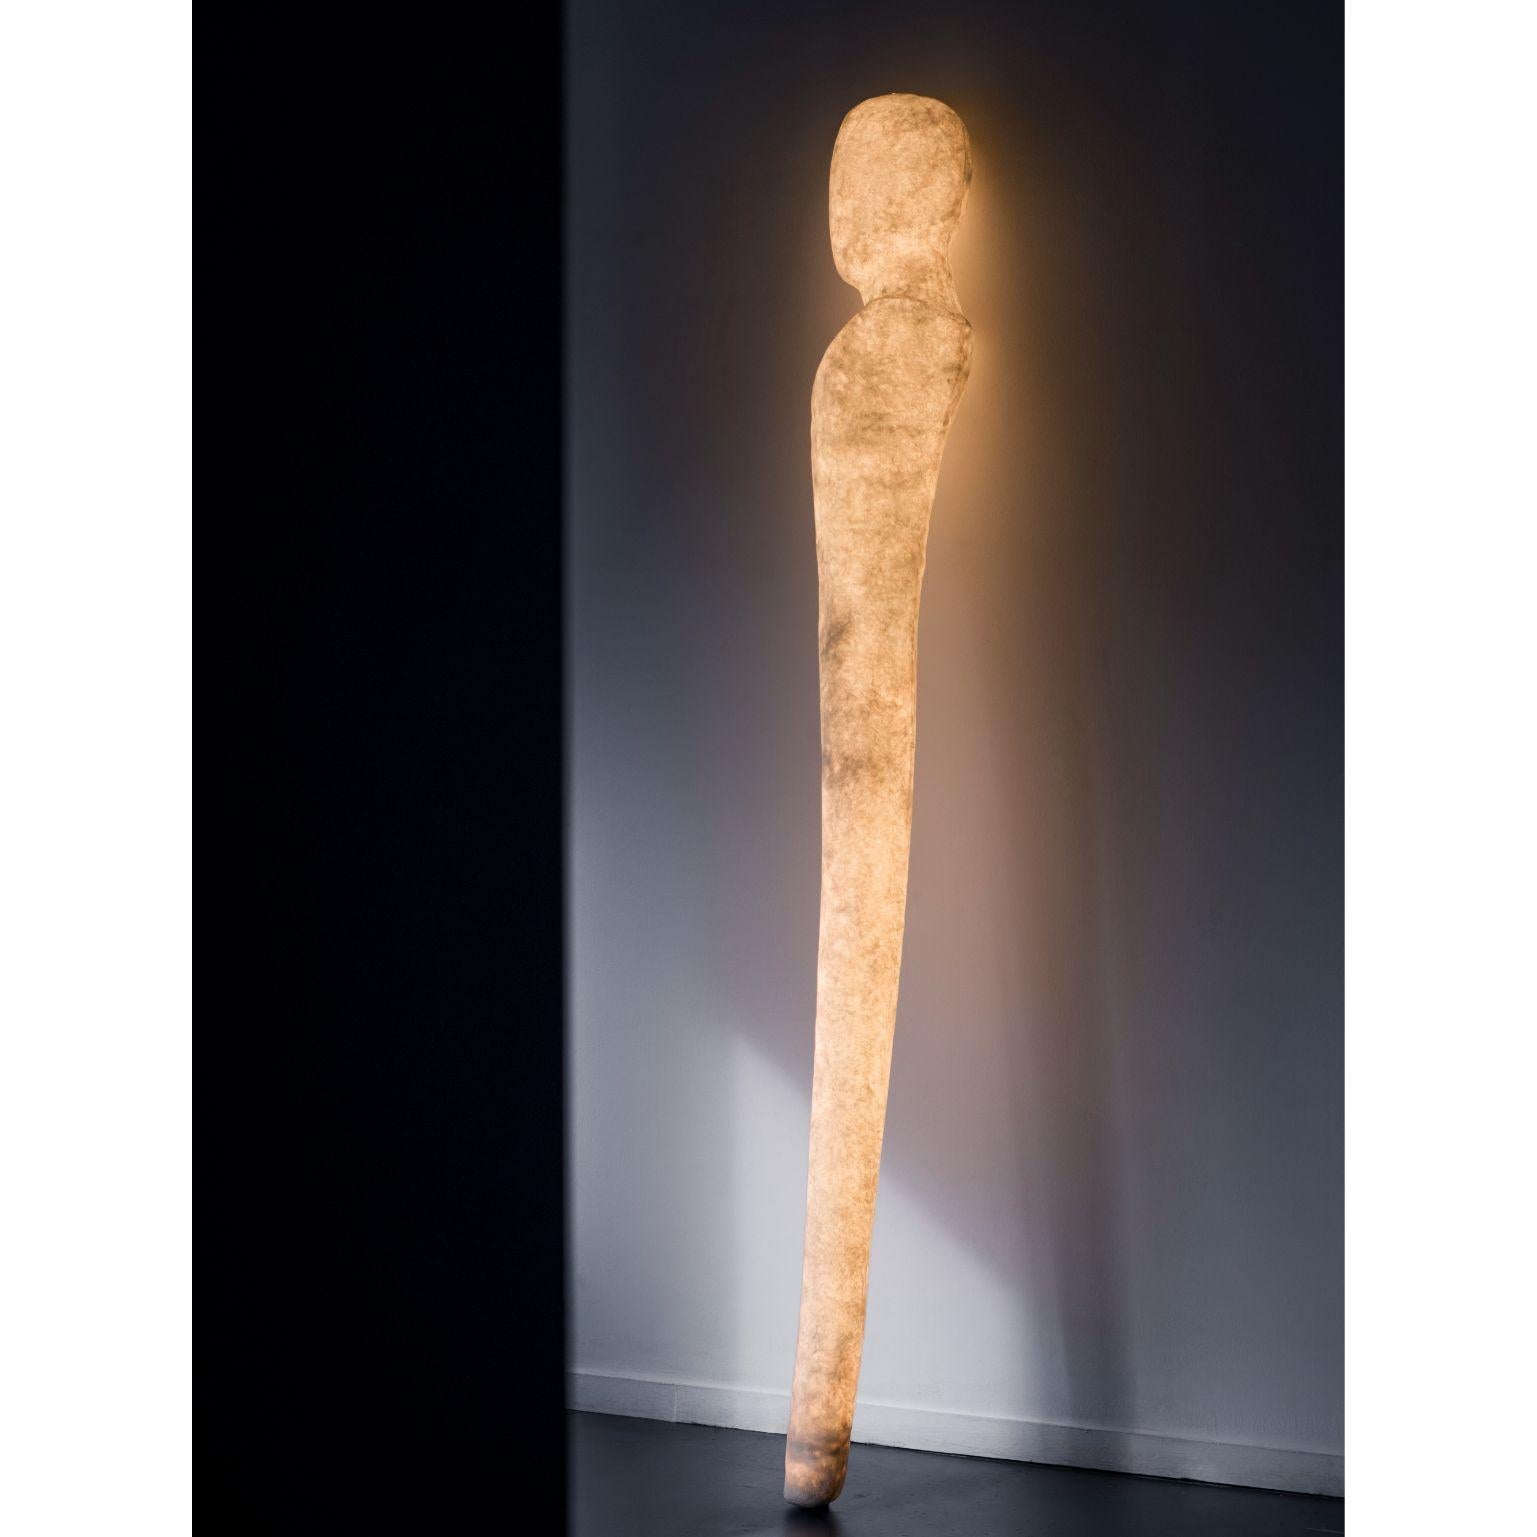 Contemplator - Light sculpture by Atelier Haute Cuisine
Dimensions: 235 cm
Materials: Fiberglass

All our lamps can be wired according to each country. If sold to the USA it will be wired for the USA for instance.

This light sculpture is